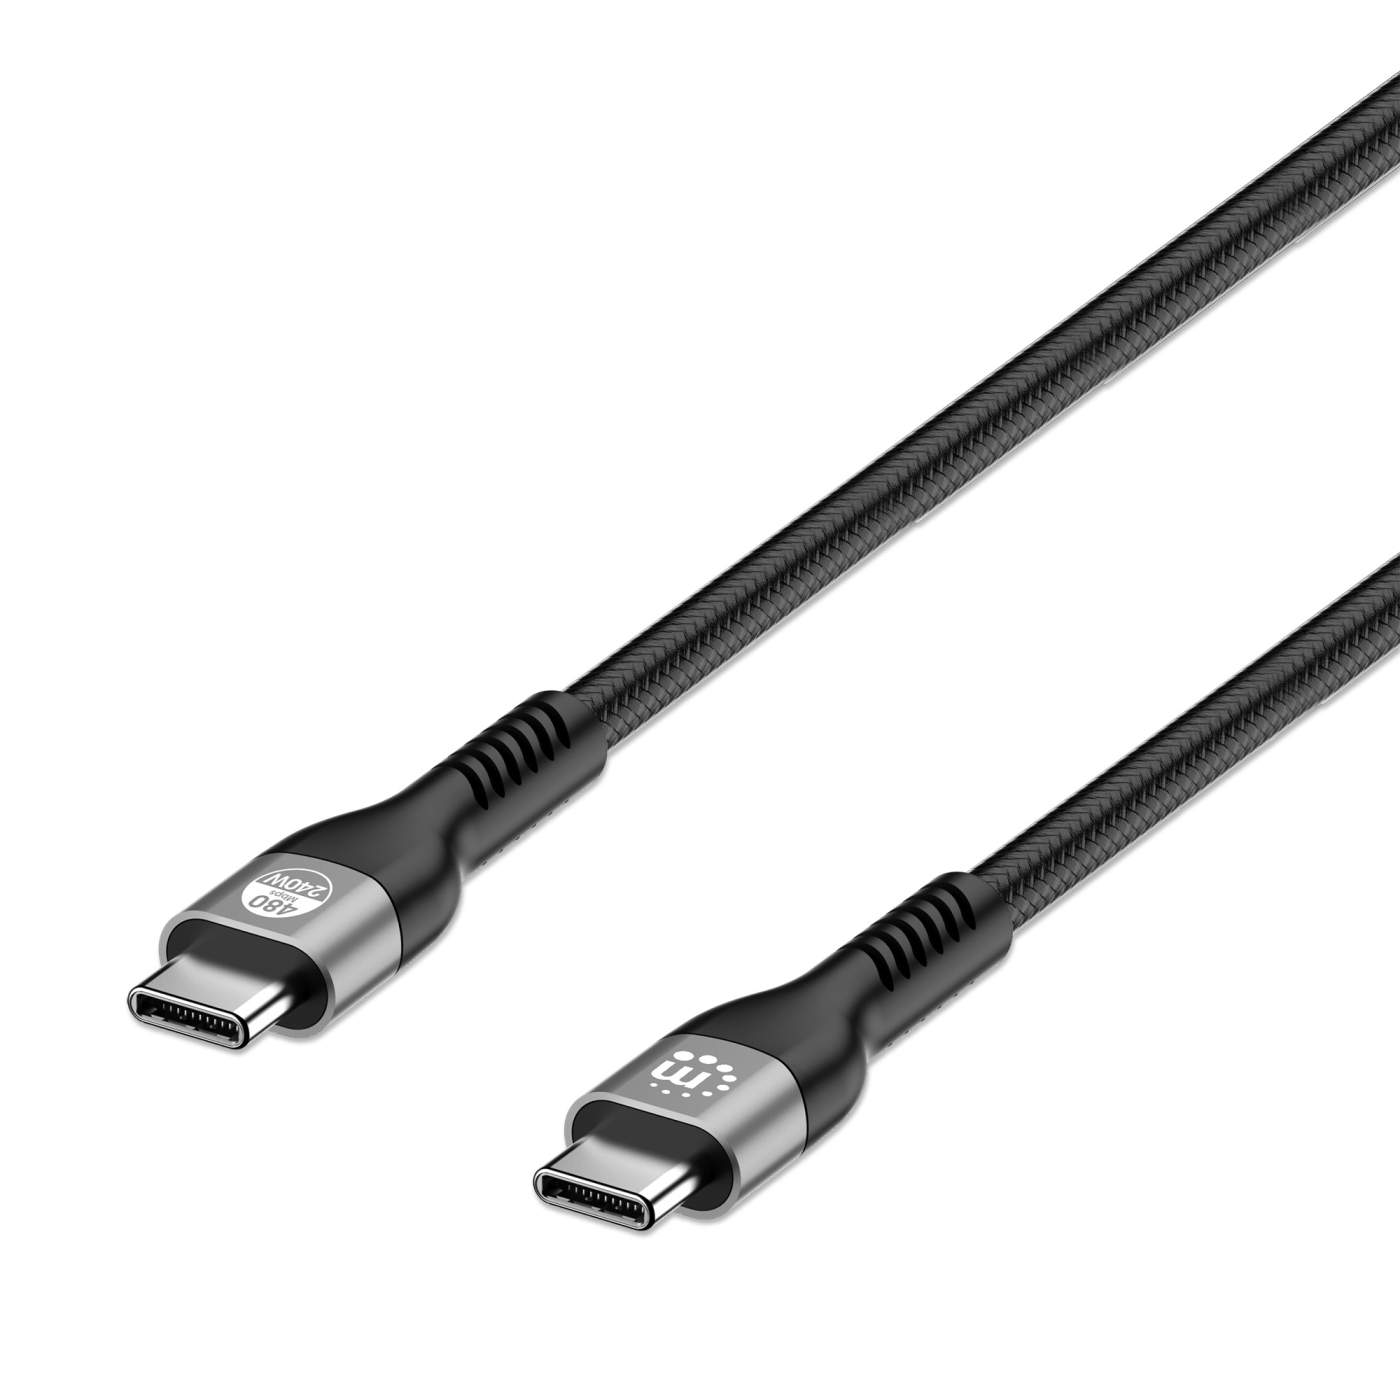 USB Type-C Charging Cable